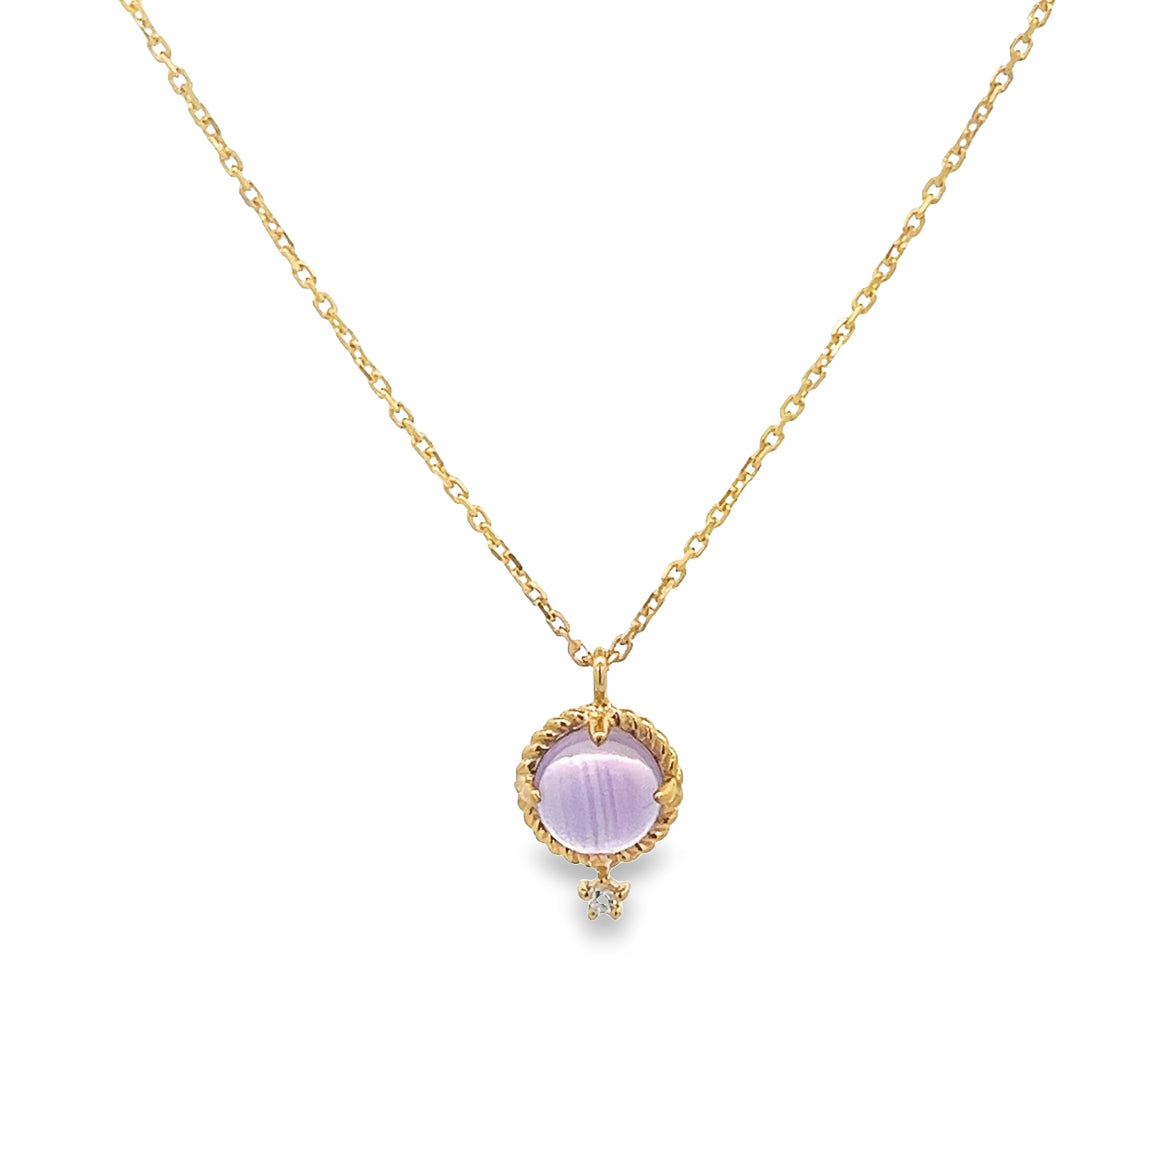 925 SILVER GOLD PLATED NECKLACE WITH AMETHYST AND WHITE TOPAZ